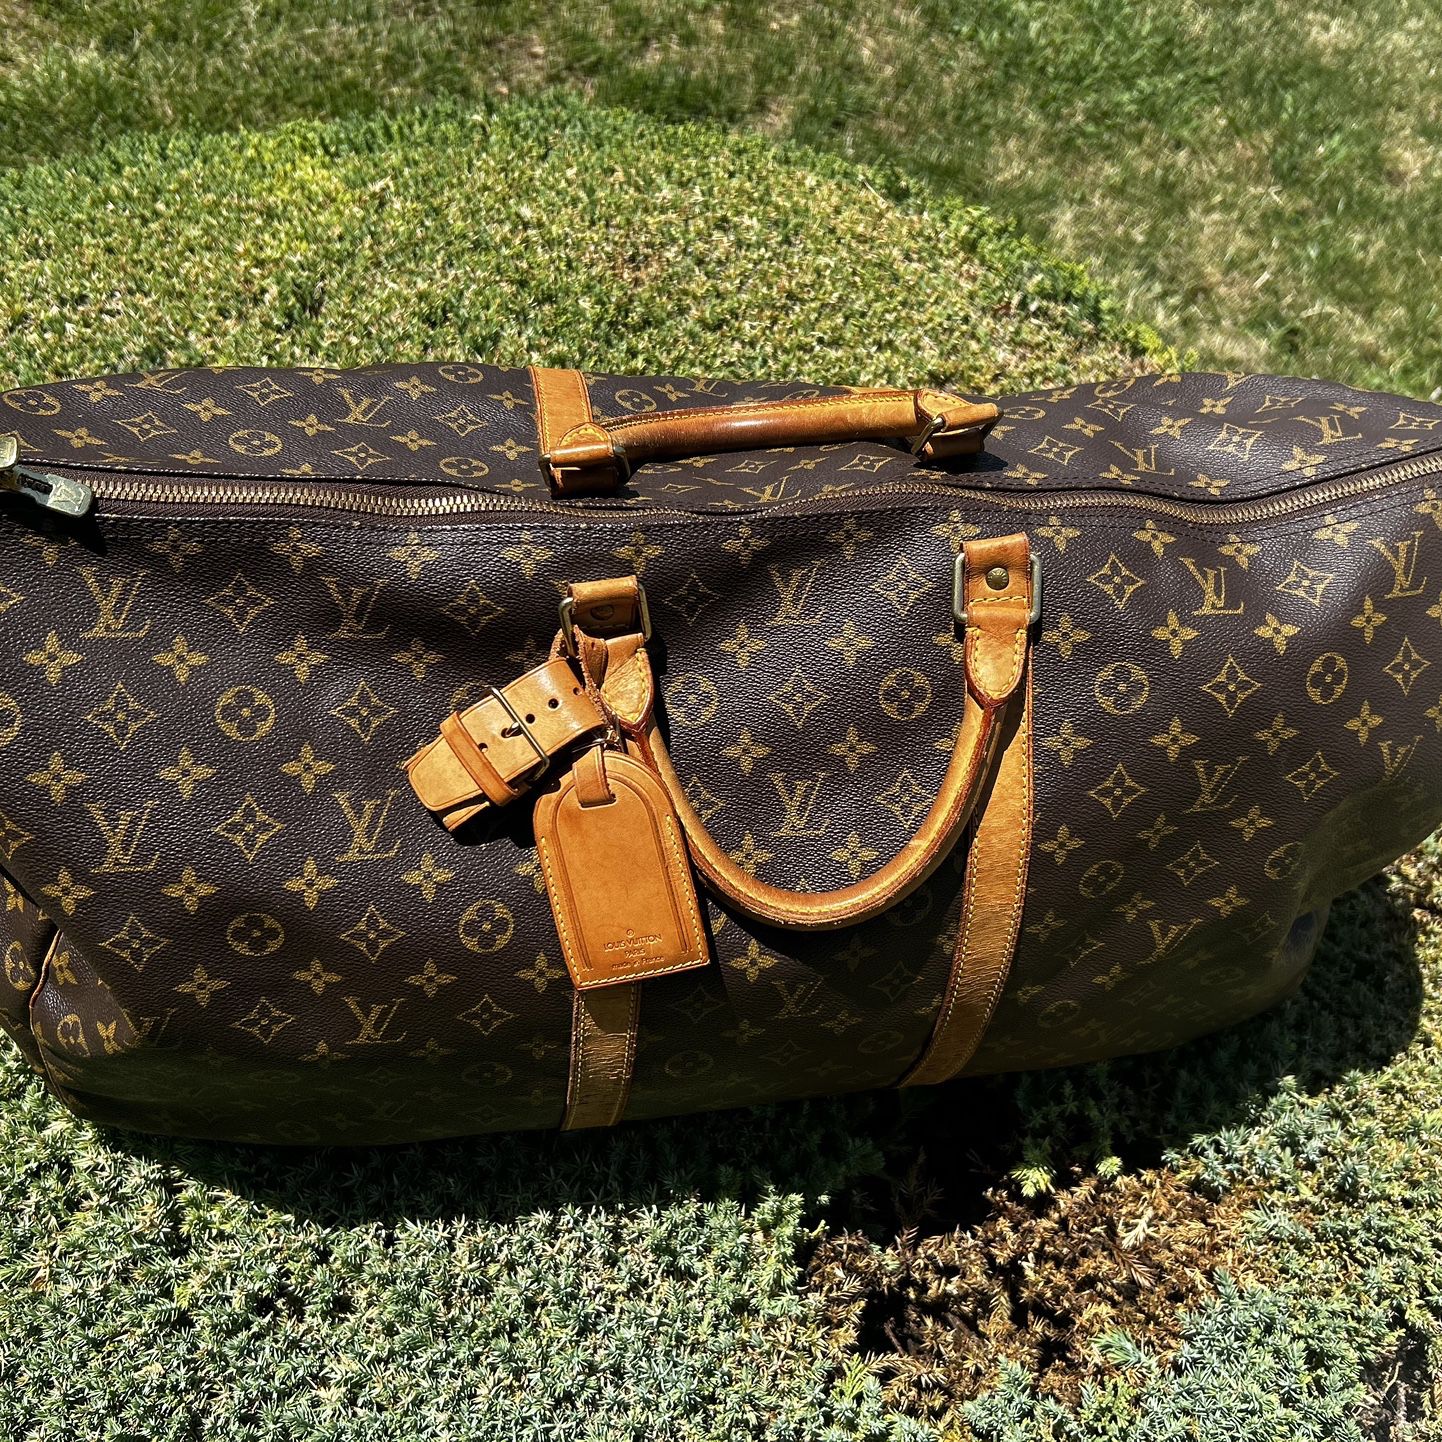 louis vuitton duffle bags prices